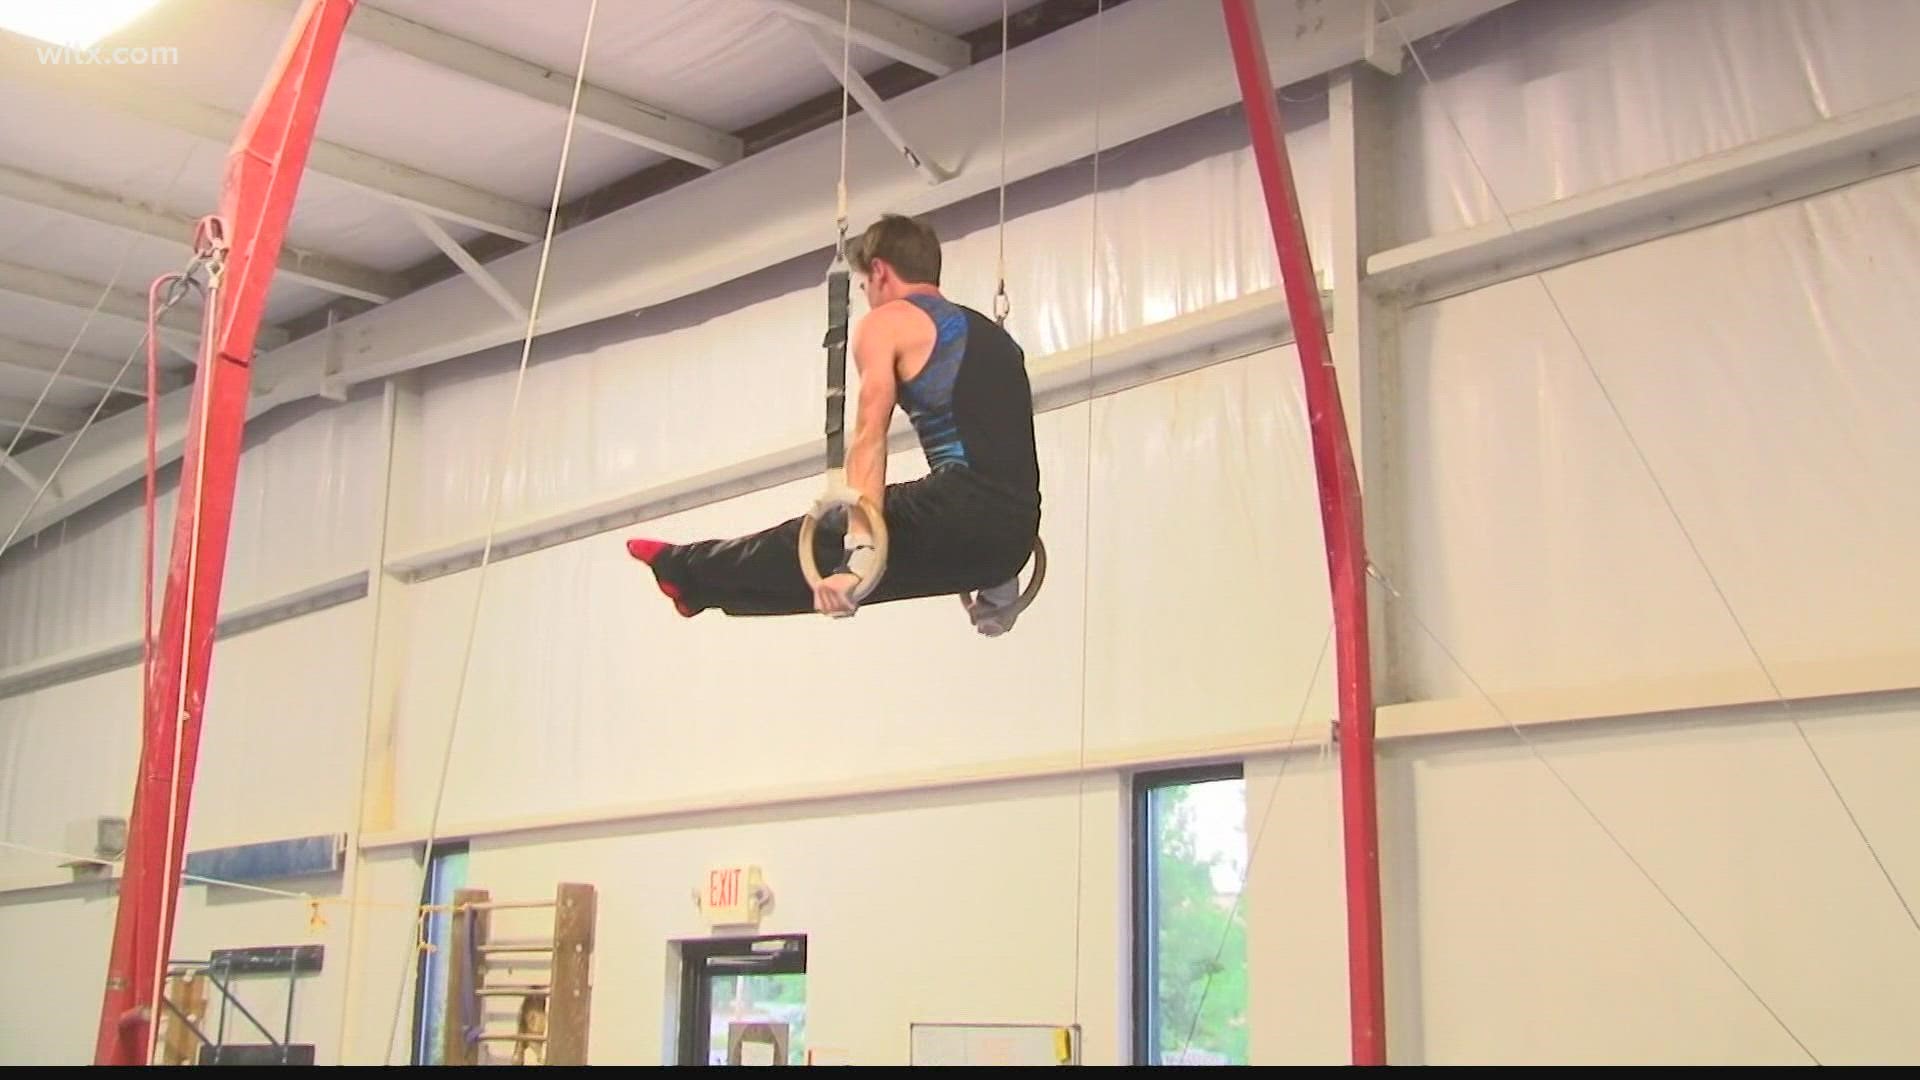 5 young athletes in the midlands are looking to put male gymnastics on the map. And they're doing so by being the best.